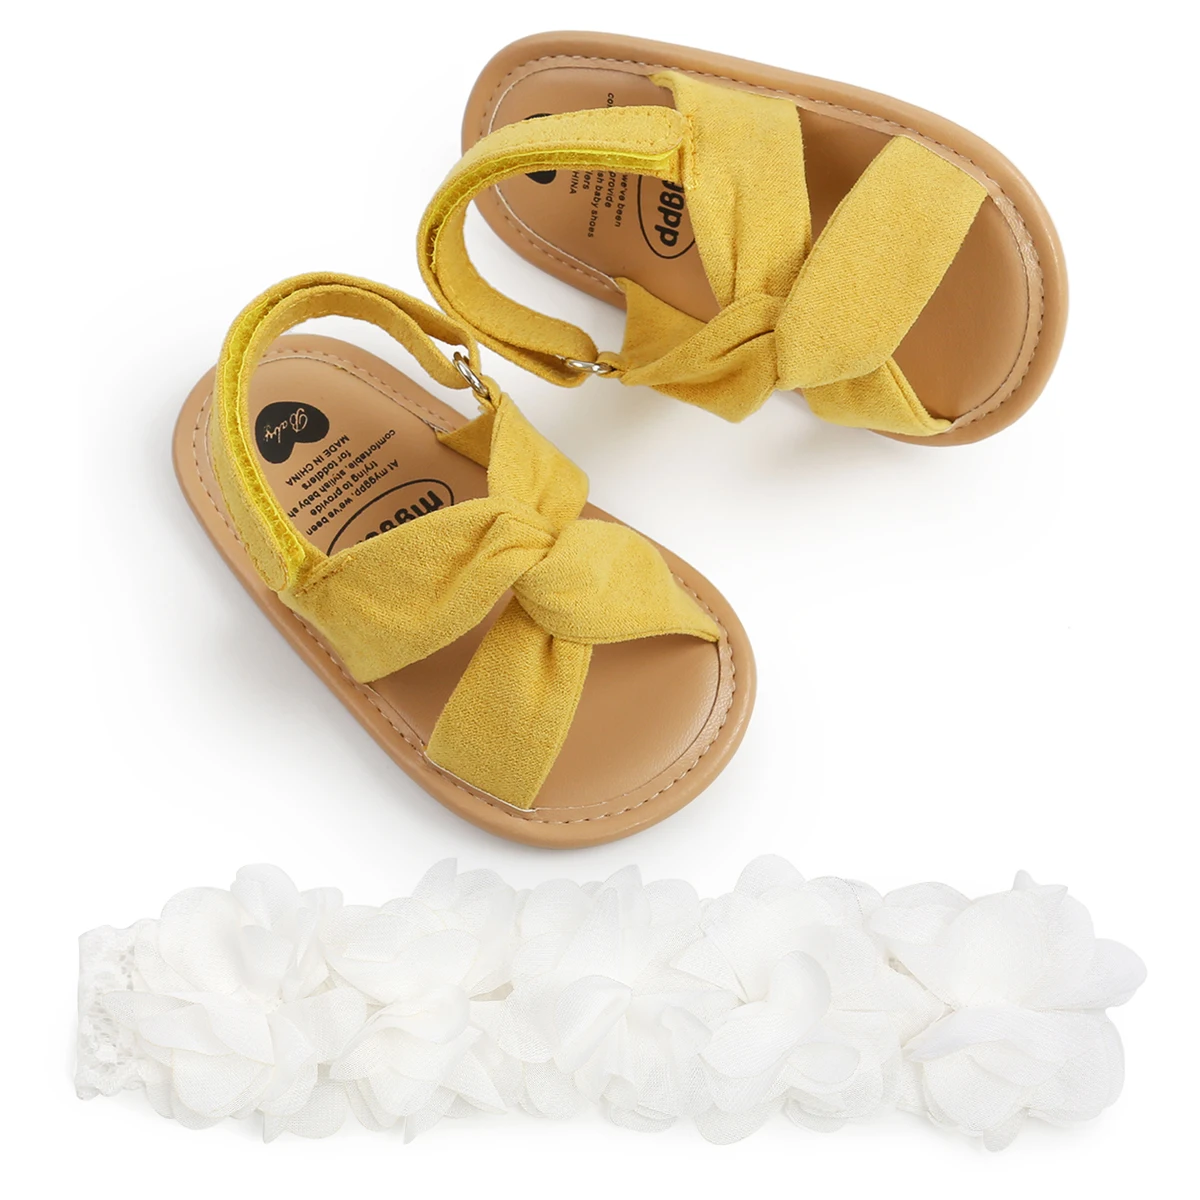 Candy Color Baby Girls Sandals Summer Newborn Toddler Soft Sole First Walkers Infant Anti-Slip Shoes Headband